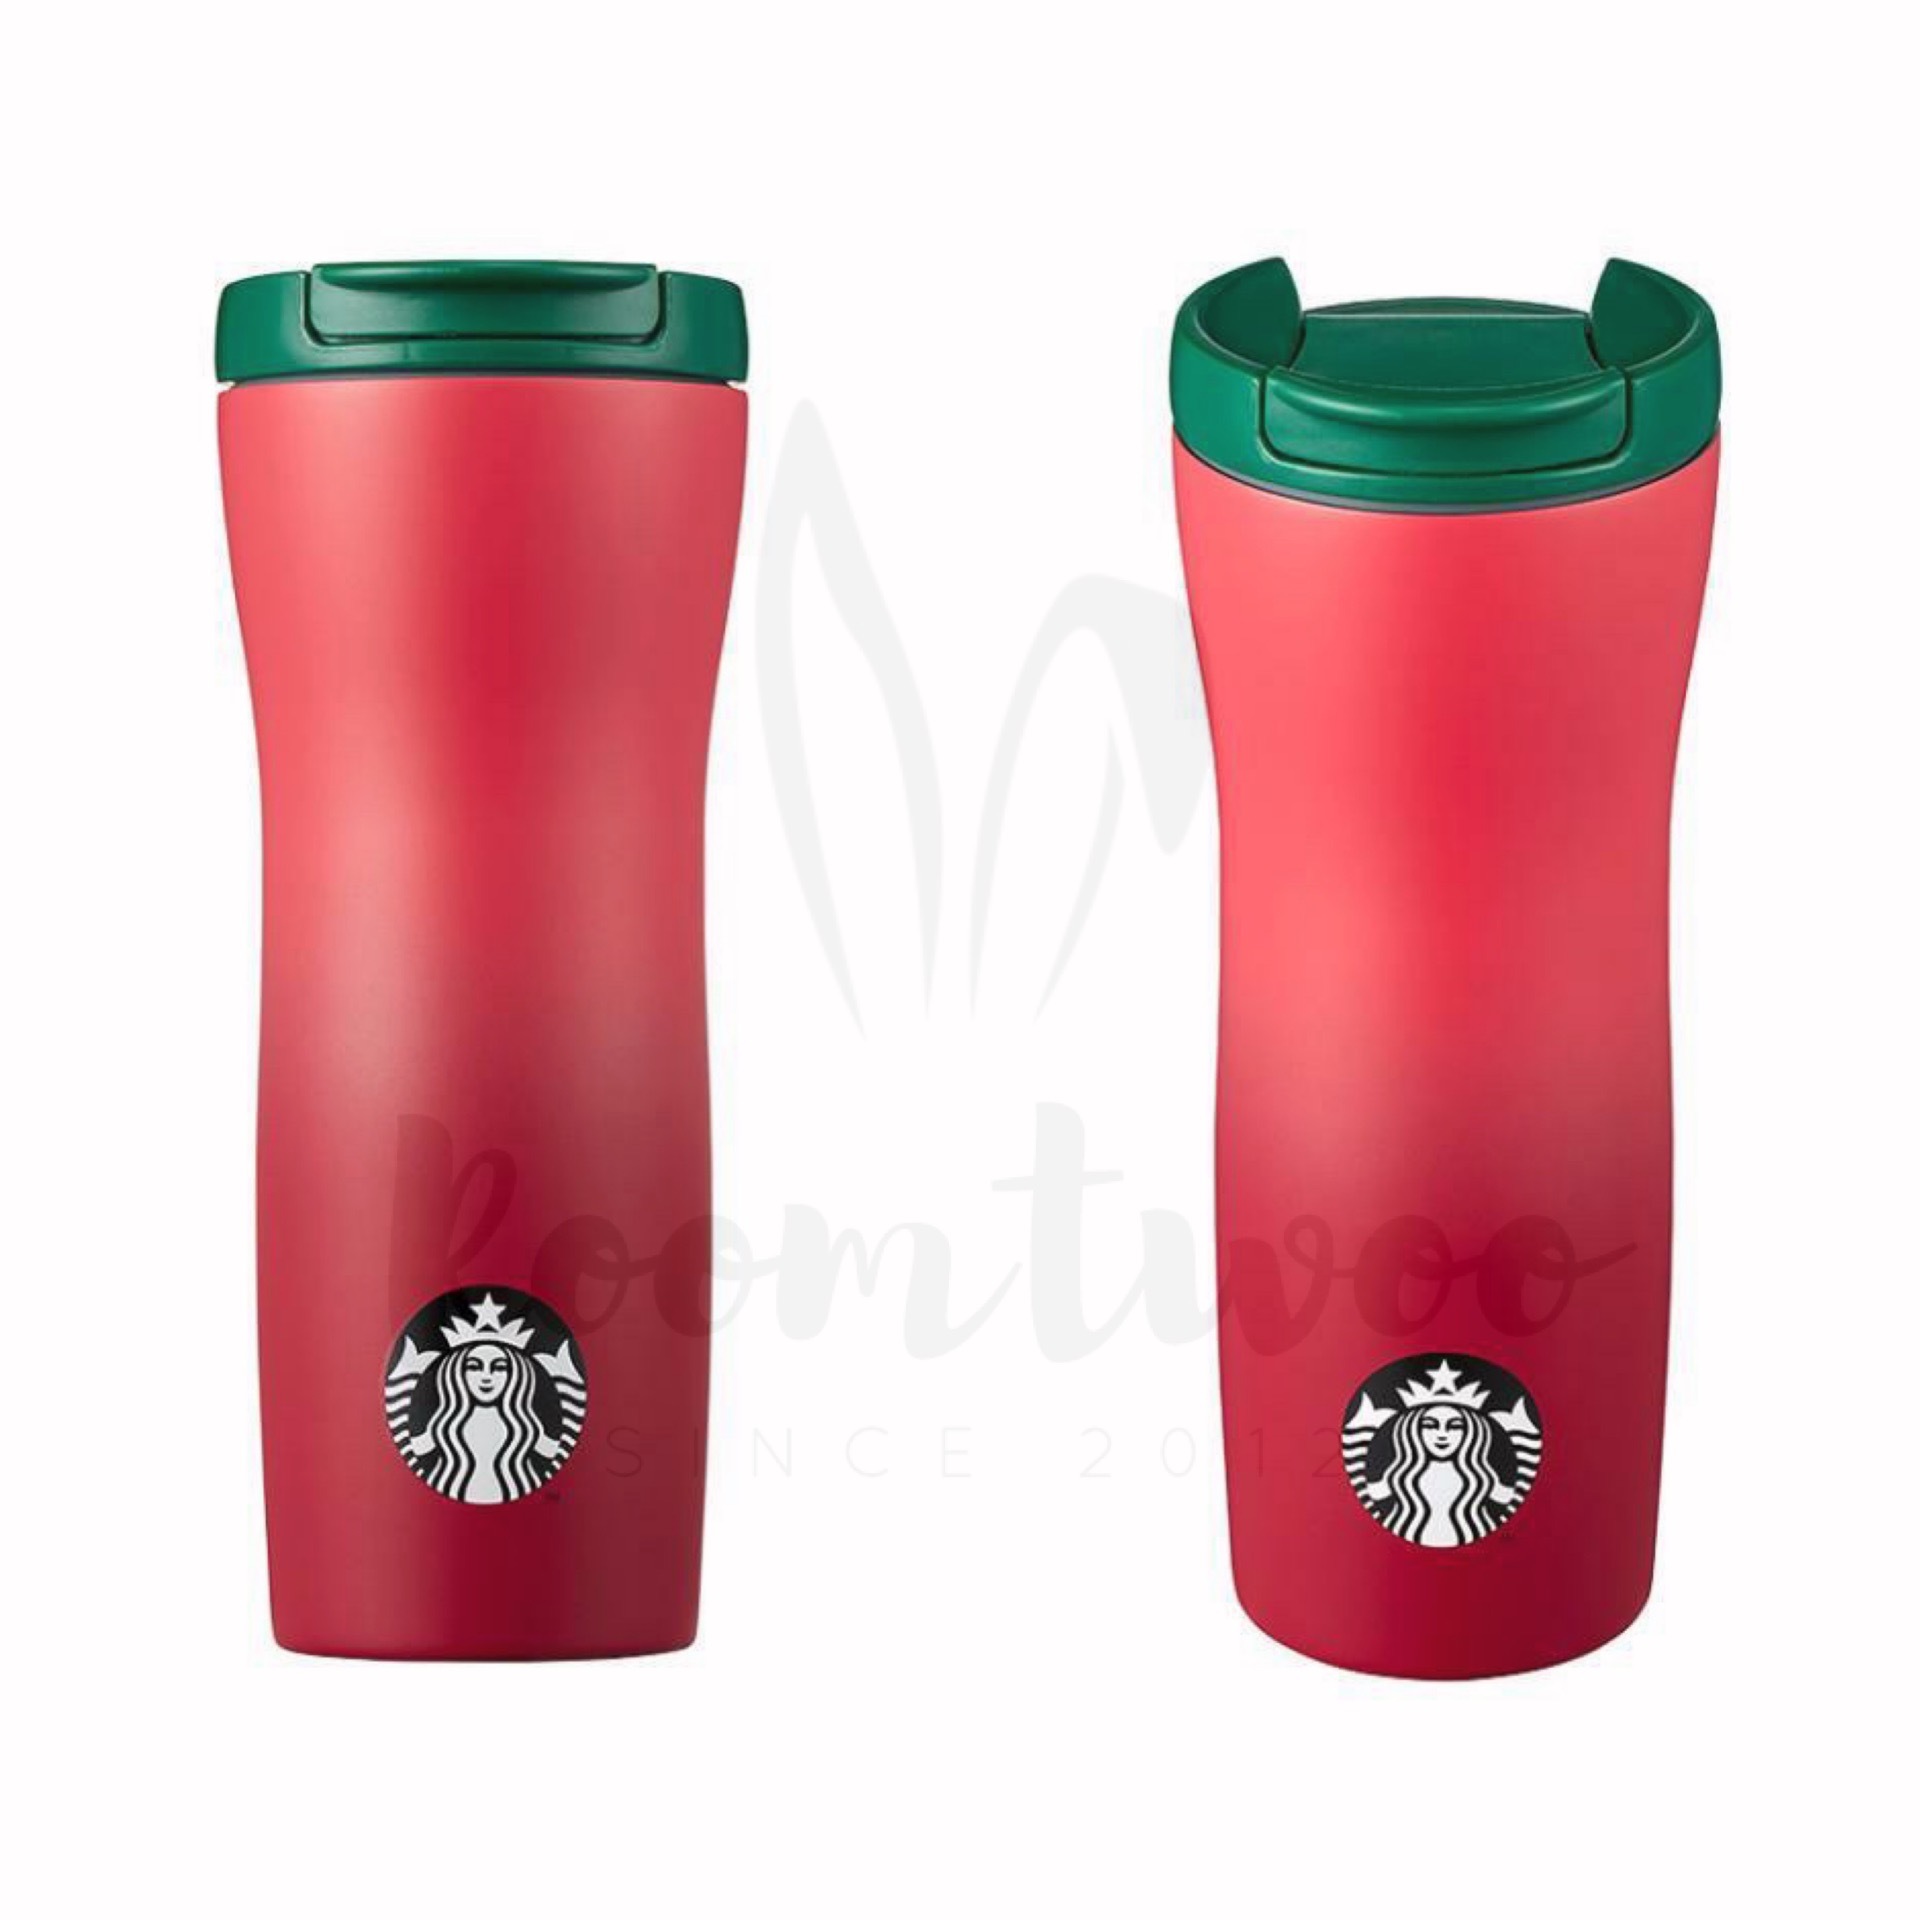 STARBUCKS SS 22 SS Stanley green + cream quencher cold cup 591ml Set + Gift